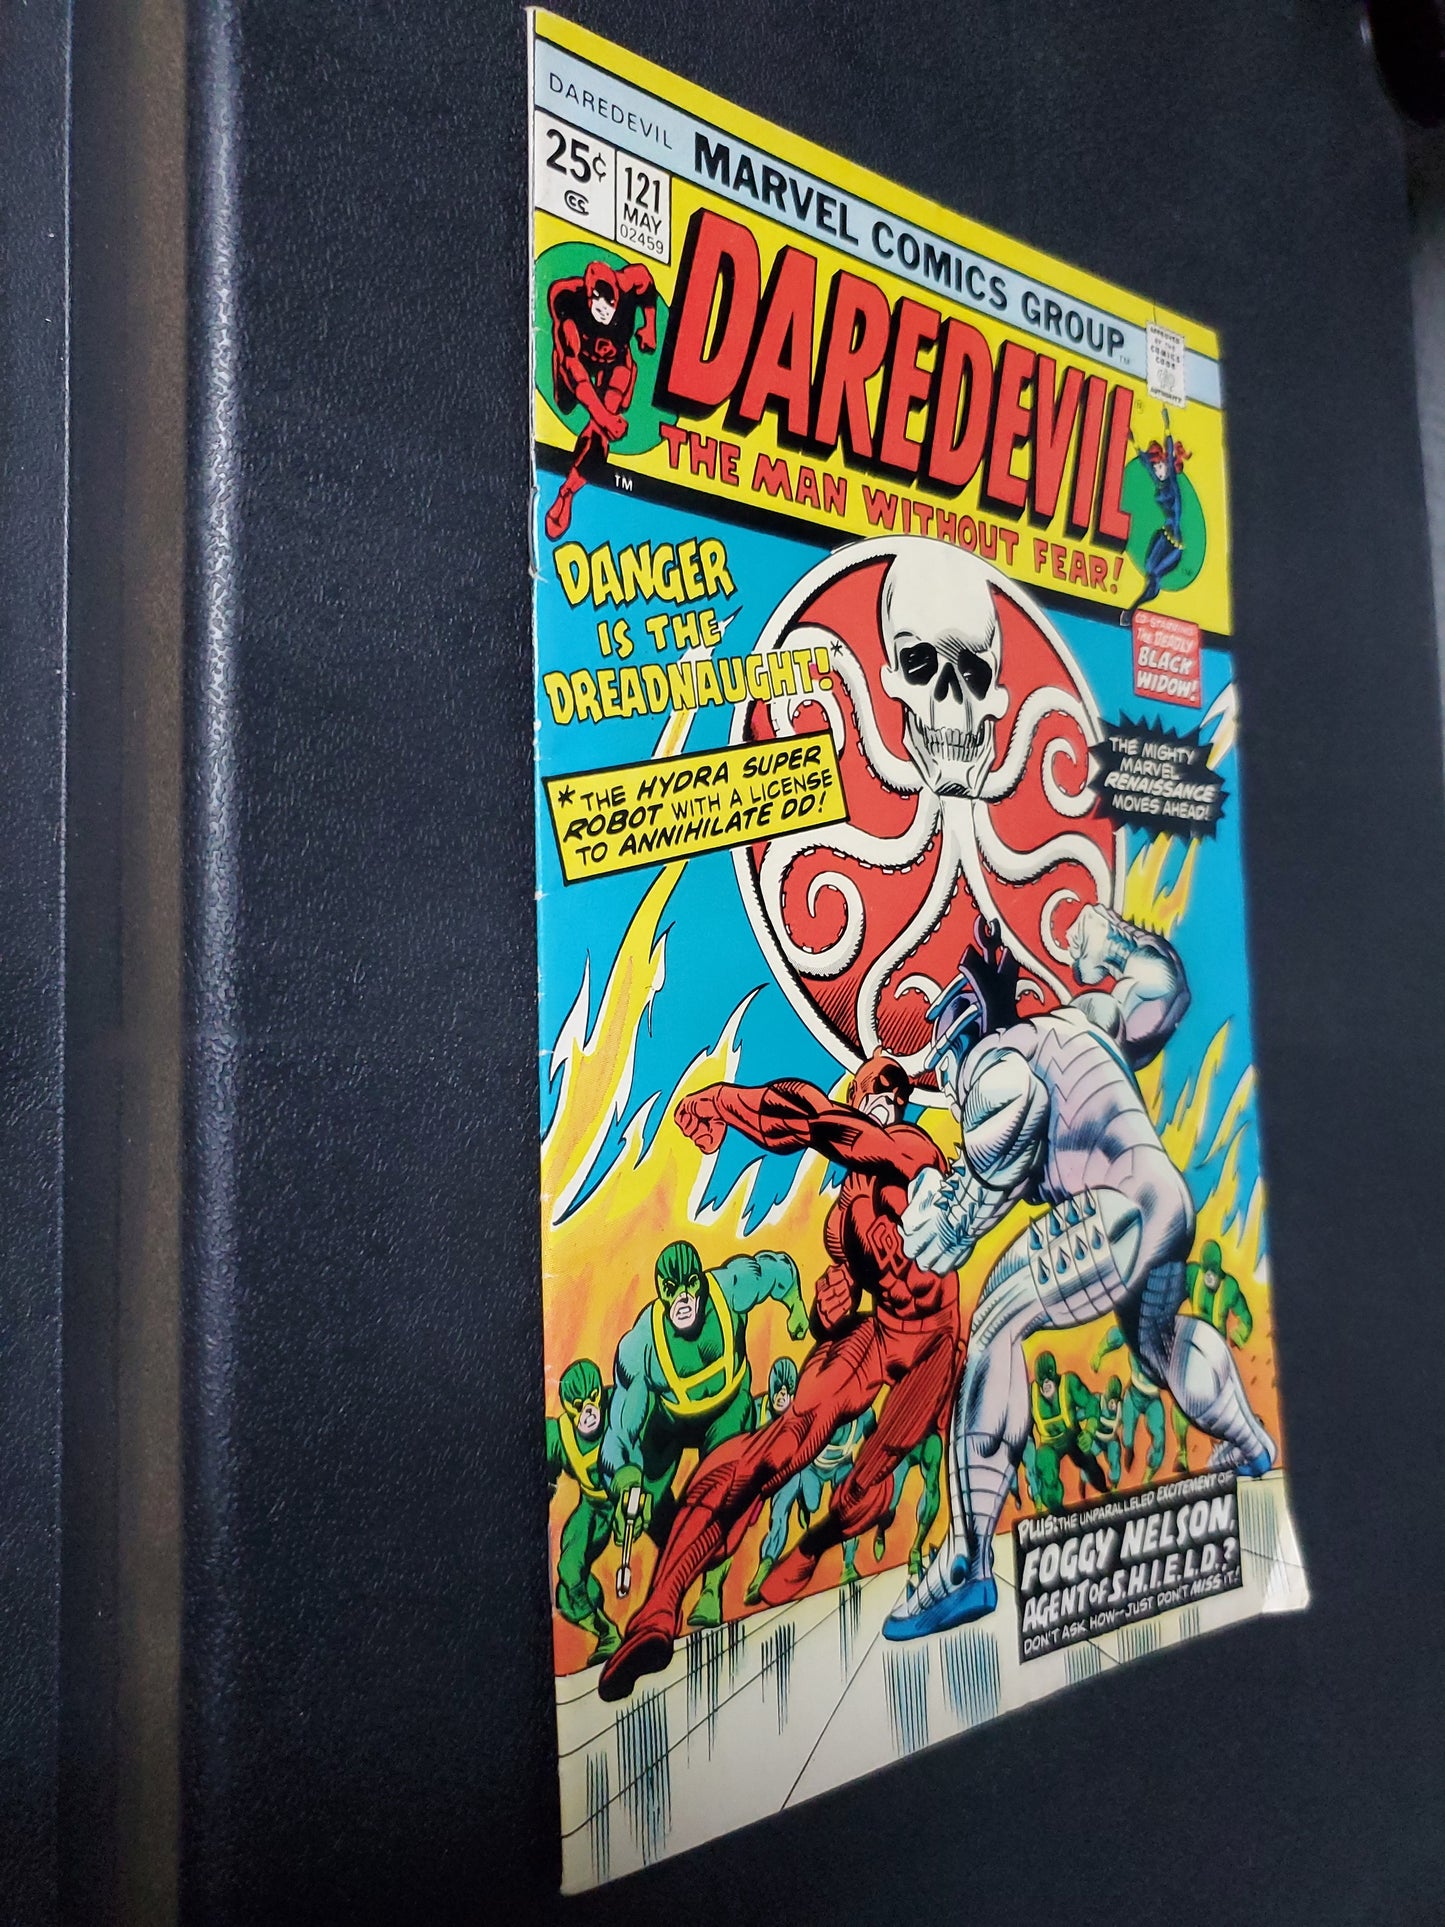 Daredevil 121 The Man Without Fear Danger is the Dreadnaught